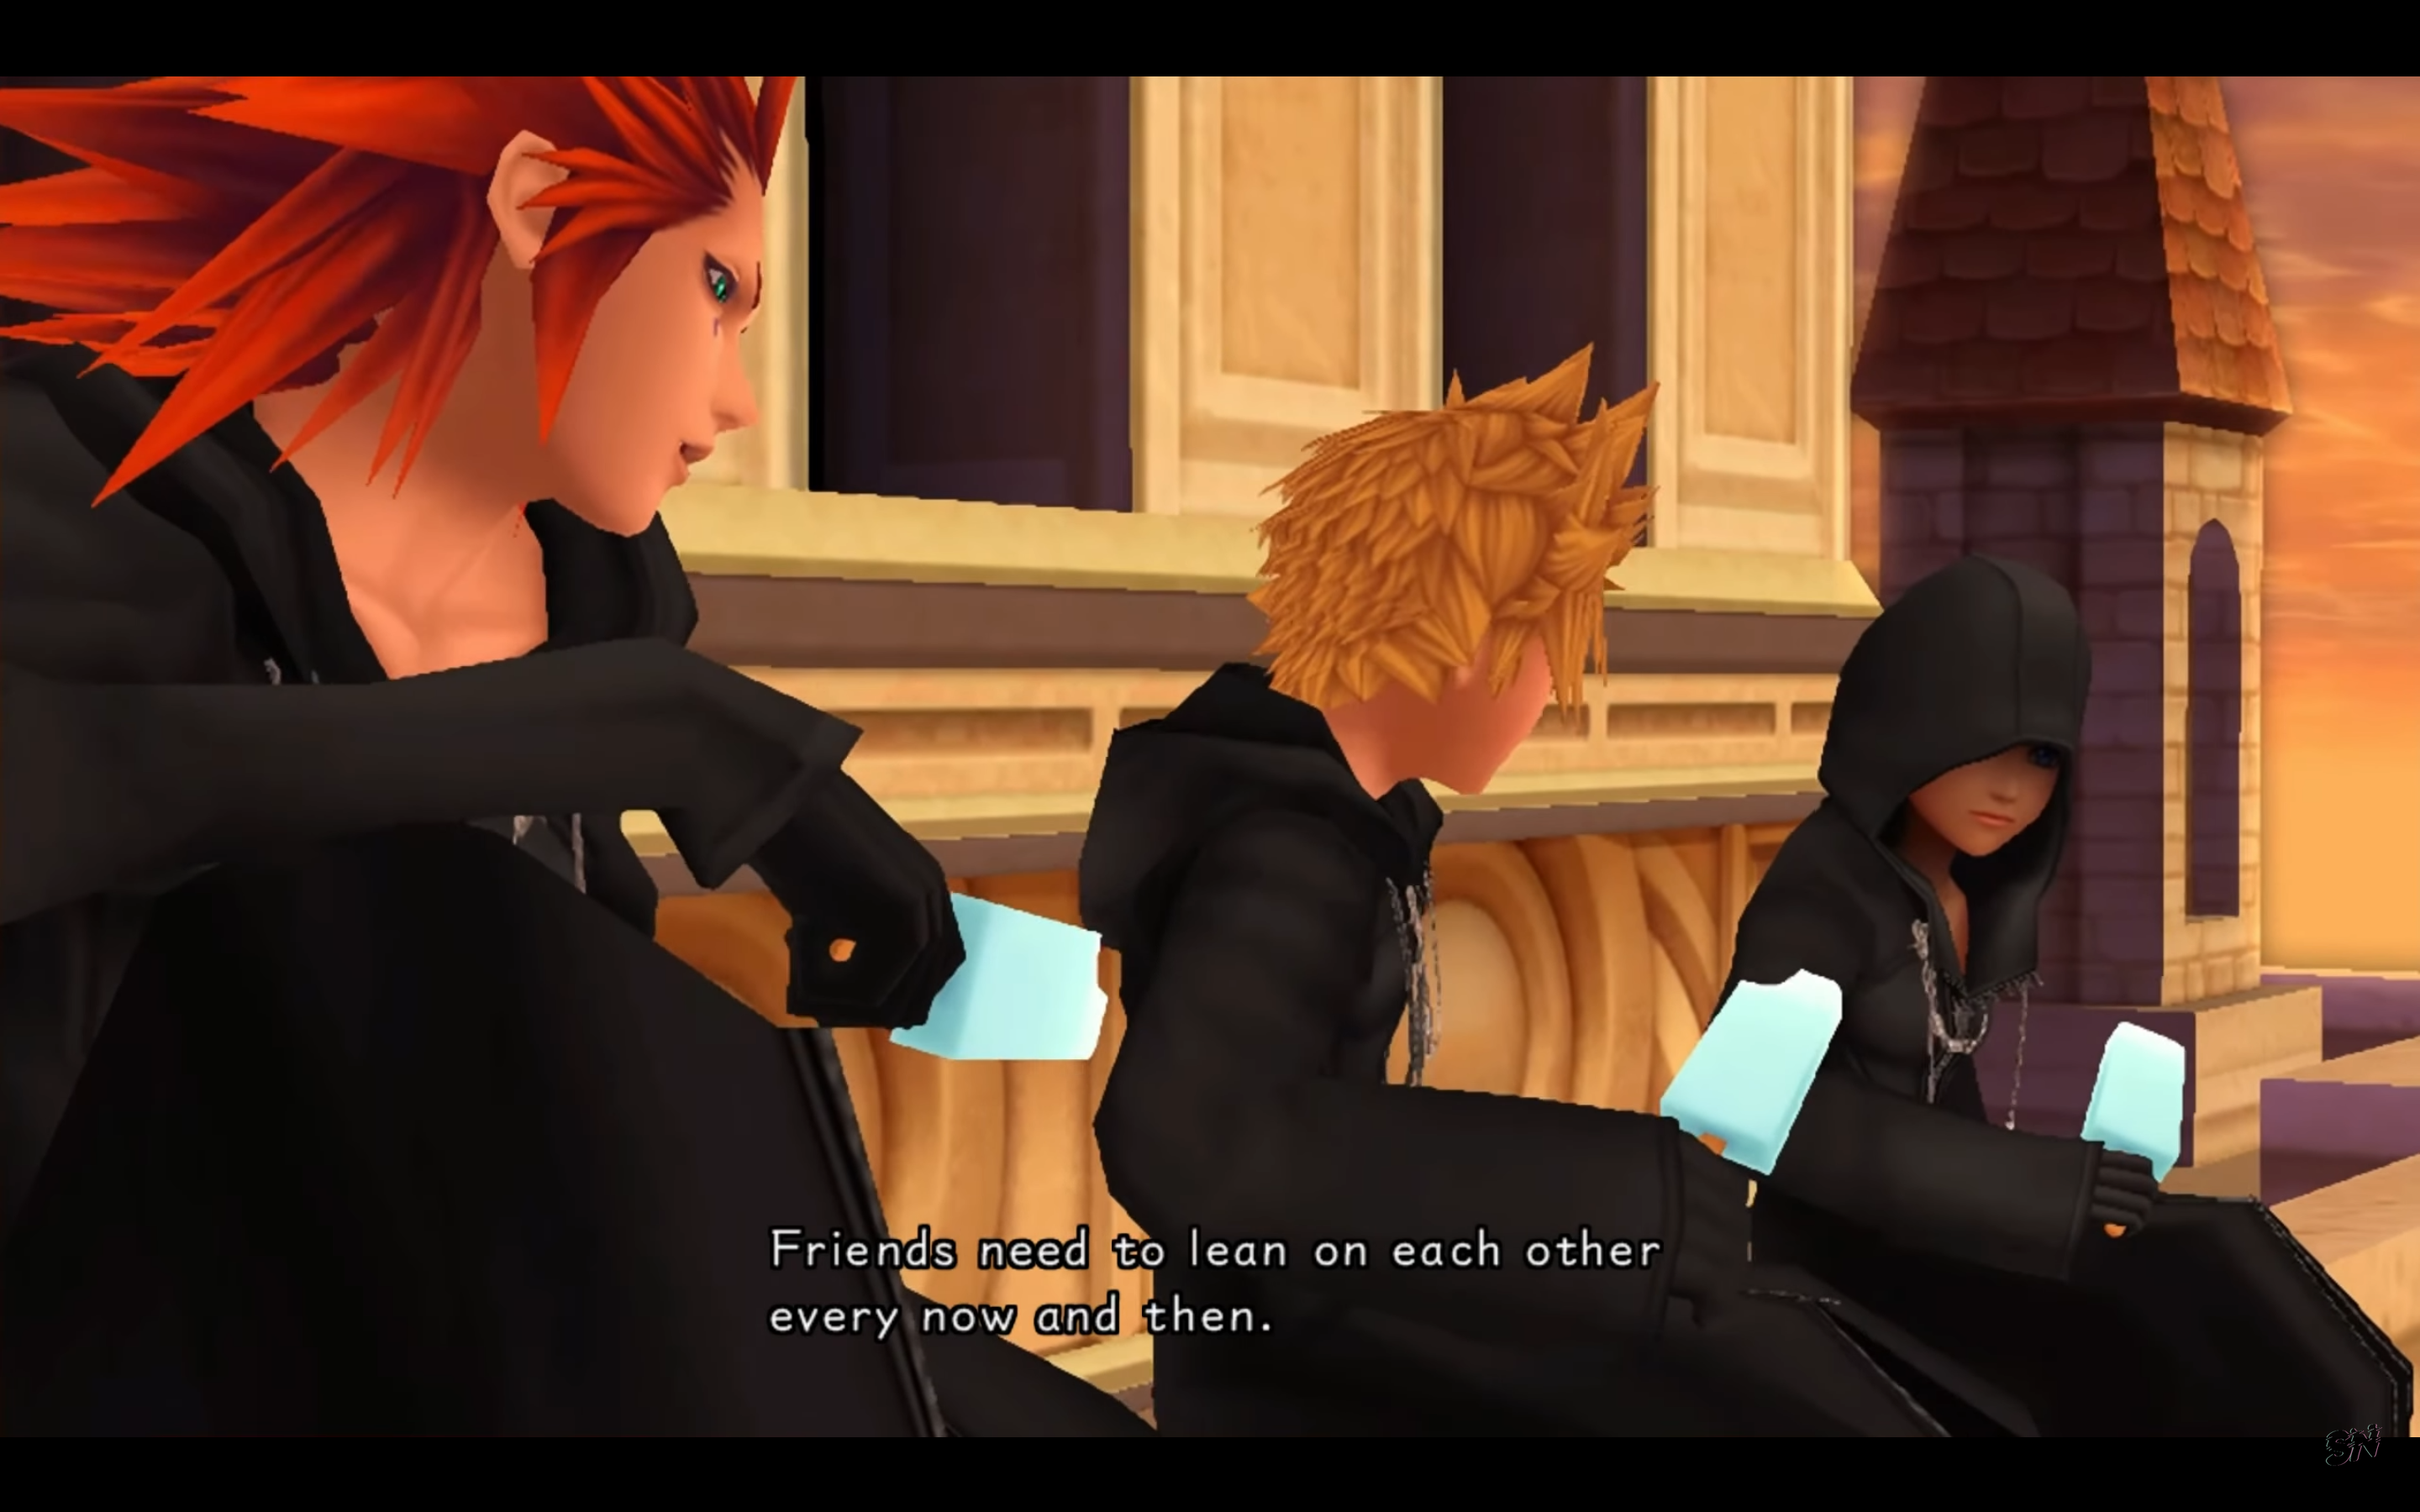 "Kingdom Hearts: 358/2 Days". 2009. Square Enix.
Axel and Roxas reassuring Xion of their plan.